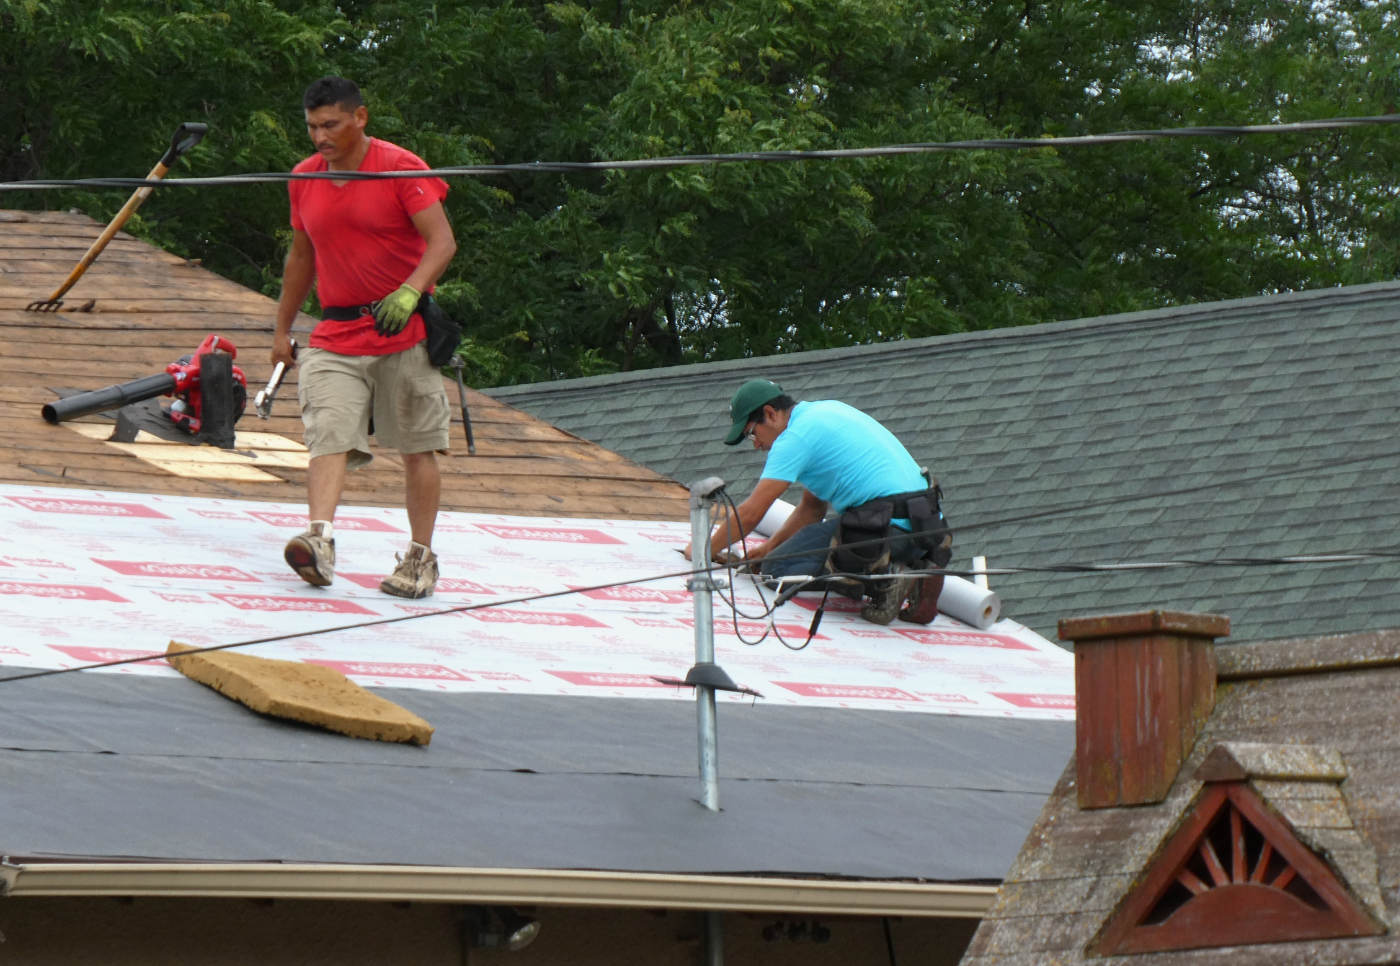 atop a roofing job, a man in a red shirt walking and a man in a blue shirt kneeling and hammering